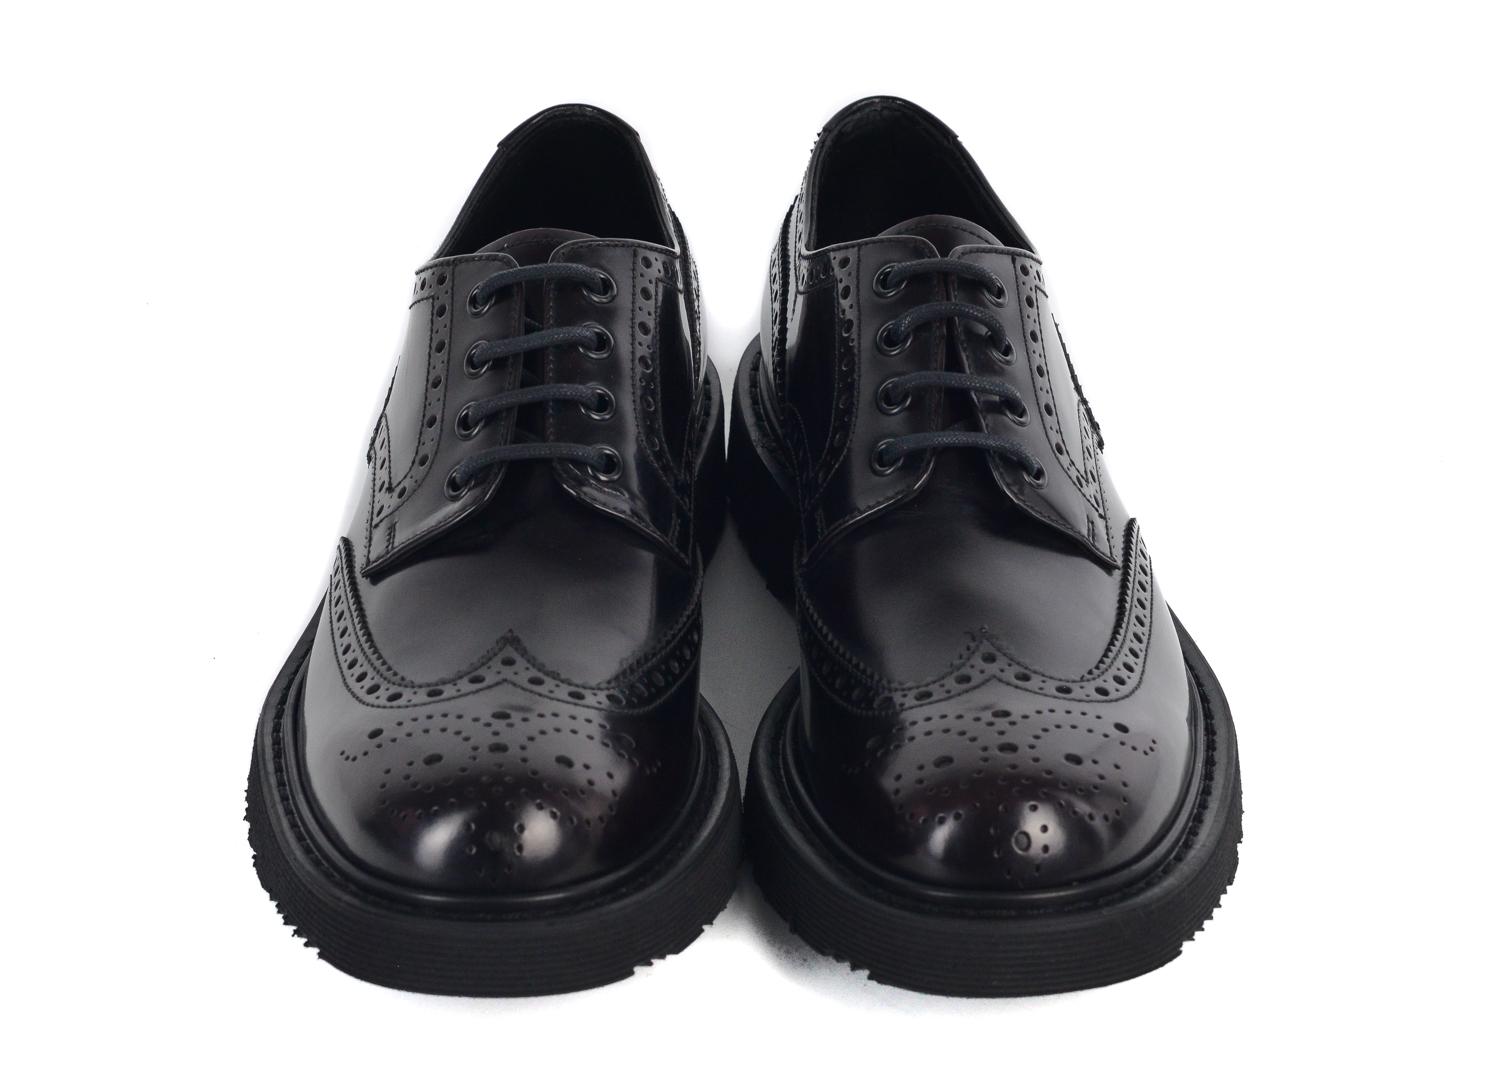 Prada's patent leather oxfords will serve as a refreshing update to your formal ensemble. This classic unit features your standard brogue pattern, unconventional patent leather combination, and 1.5 inch ridged rubber sole. You can pair these shoes